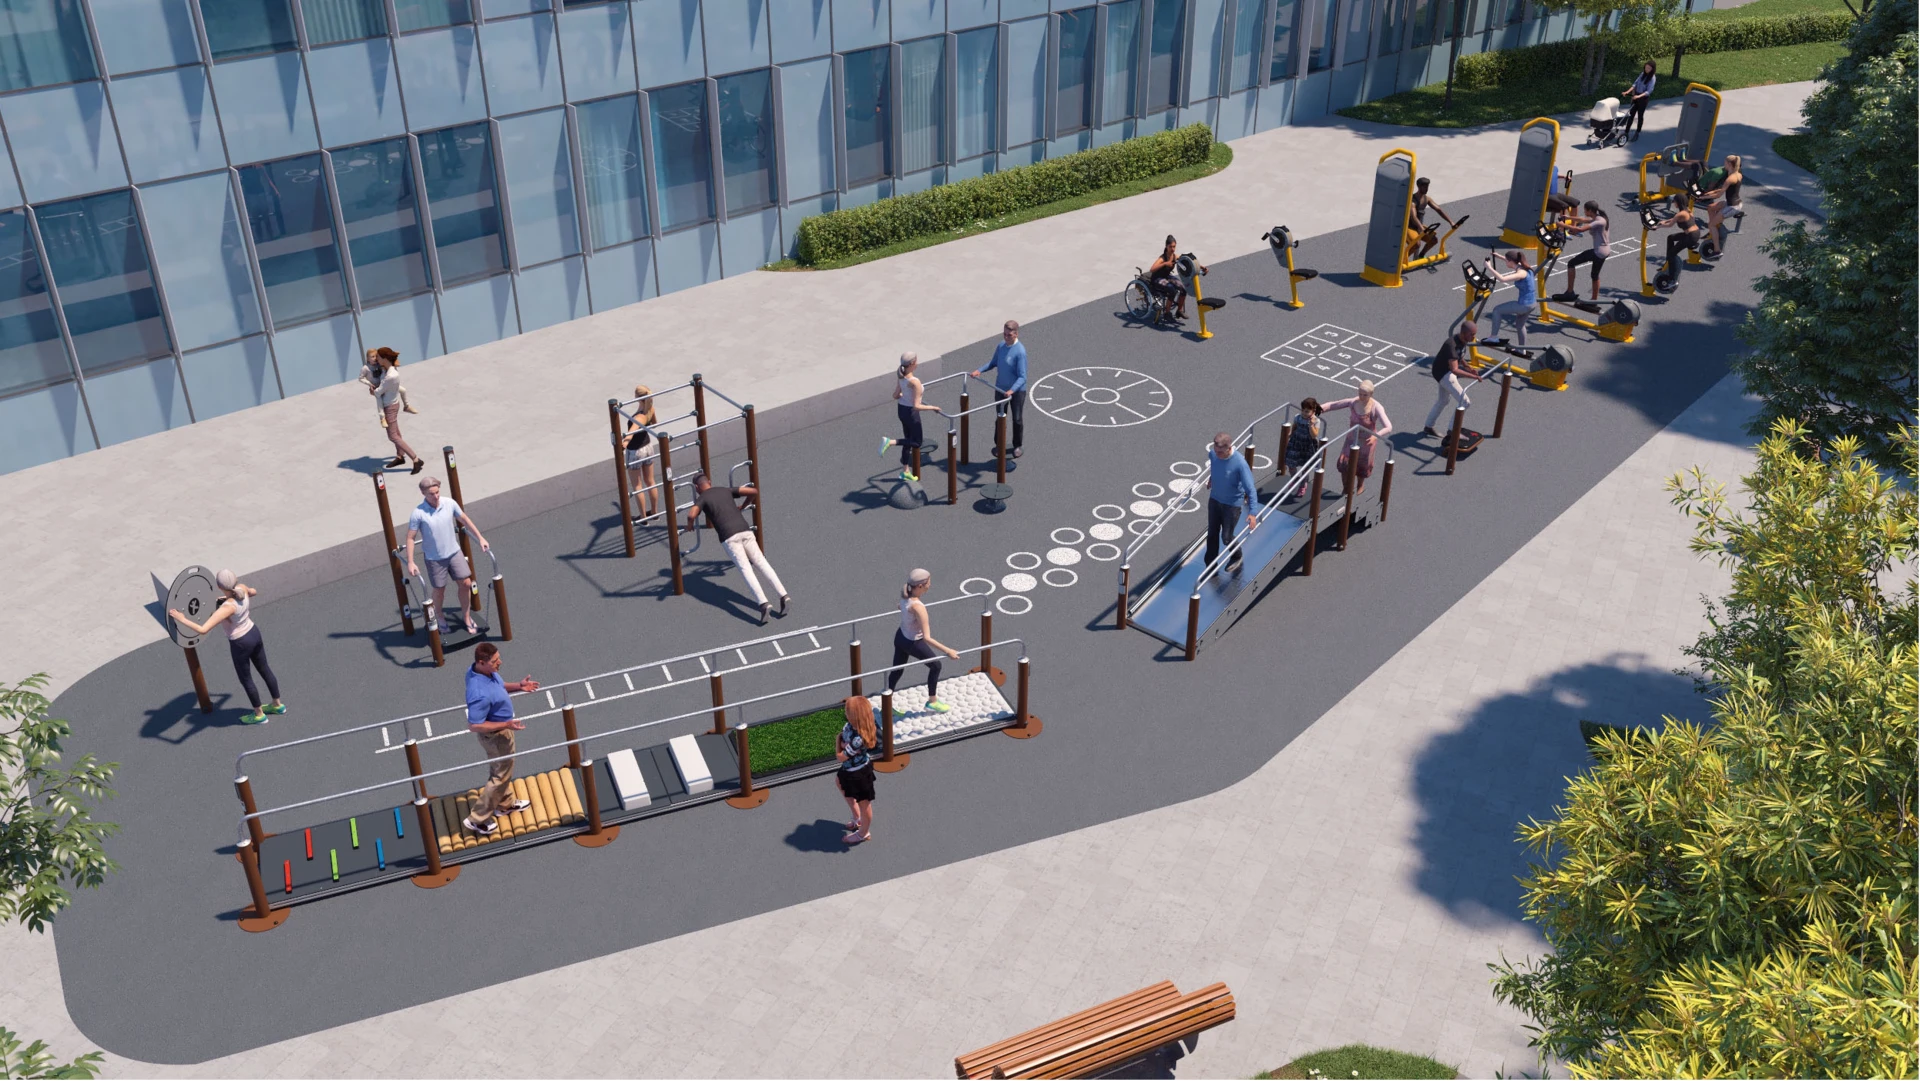 An artist's rendering of a gym in a city